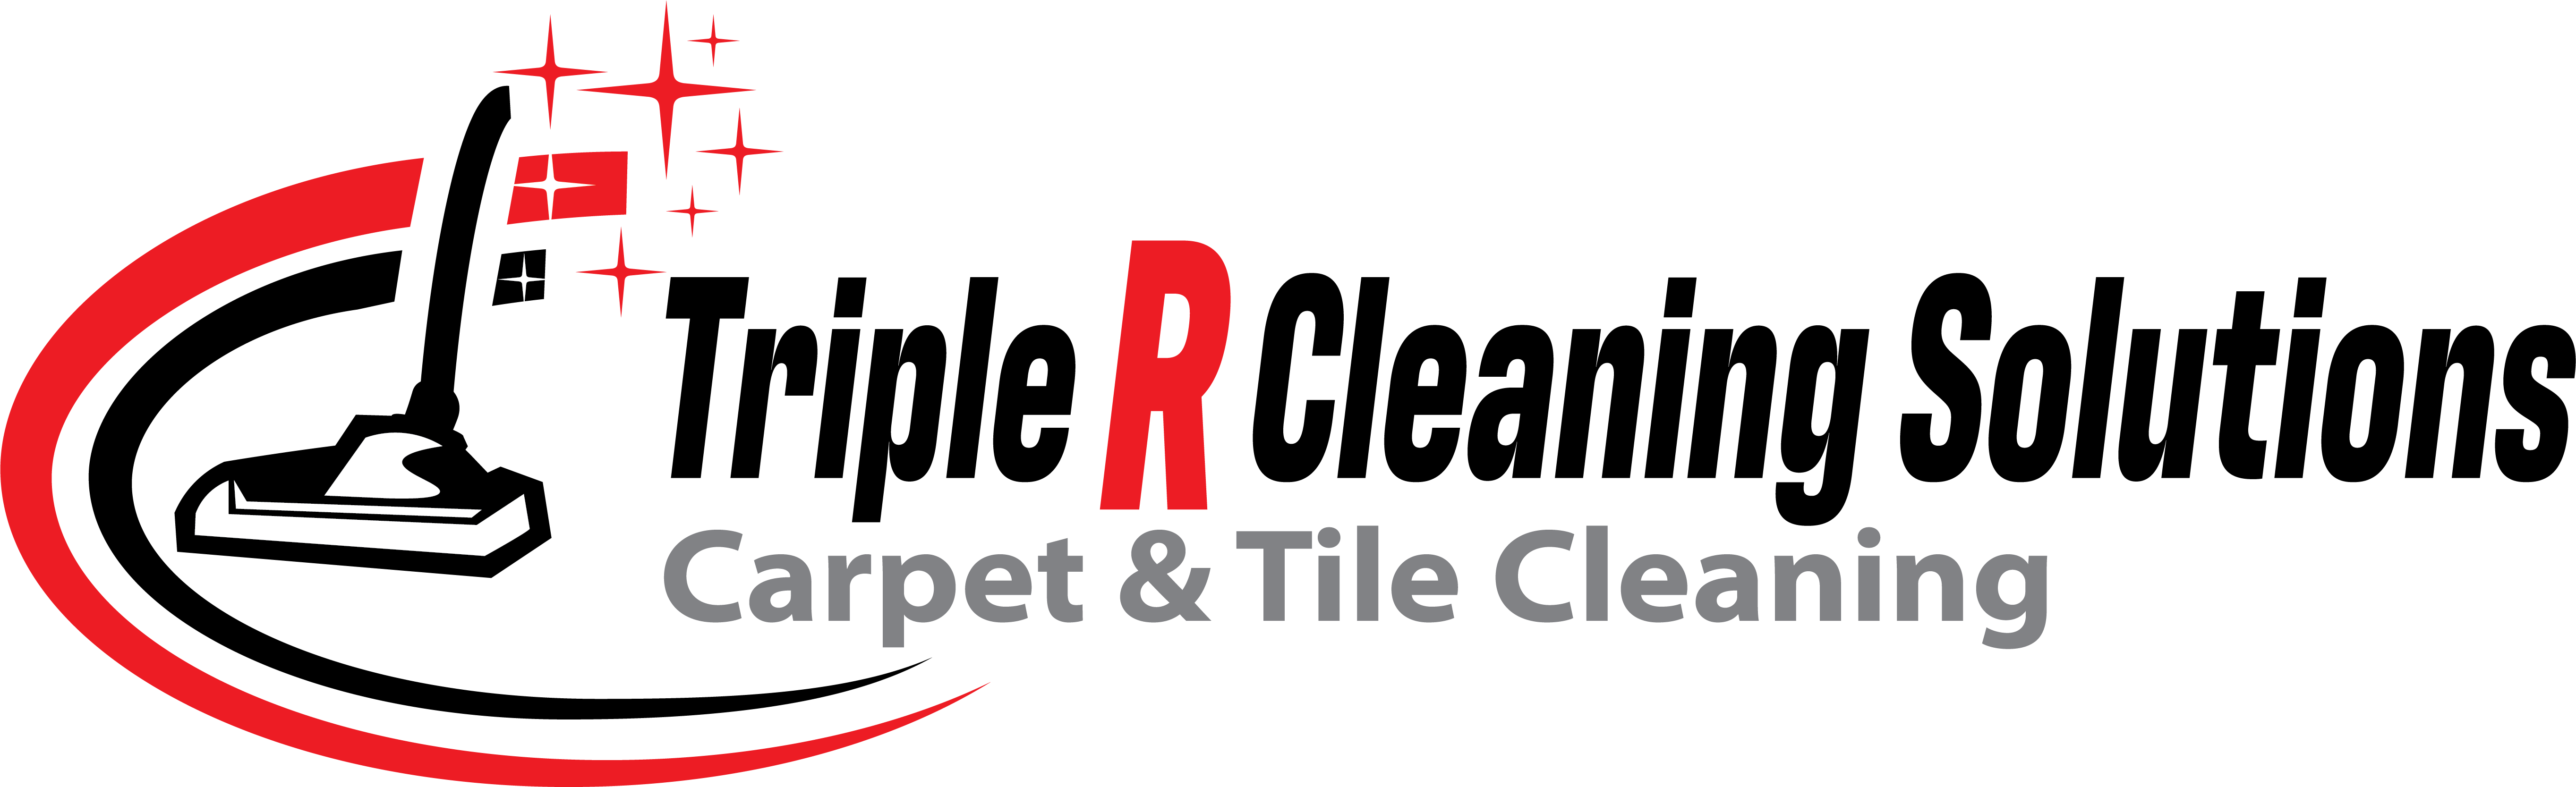 Triple R Cleaning Solutions